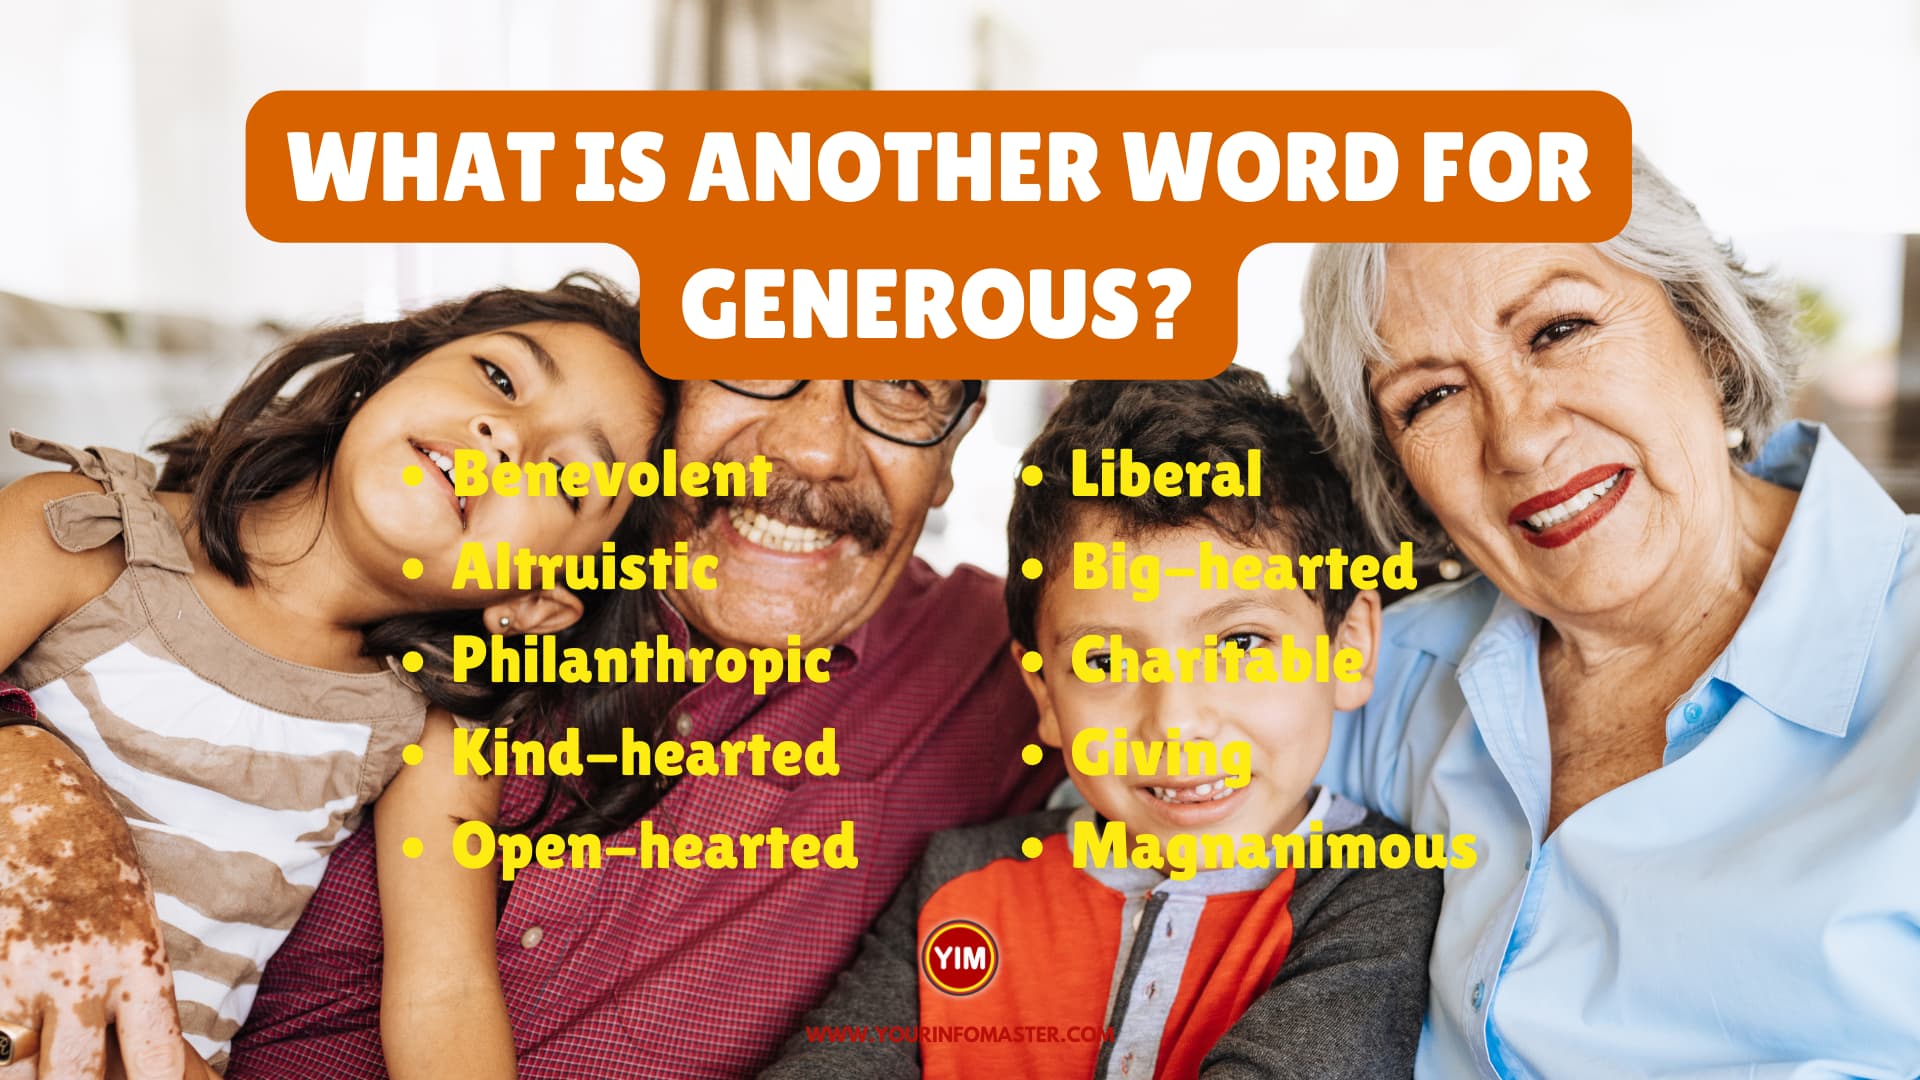 What is another word for Generous